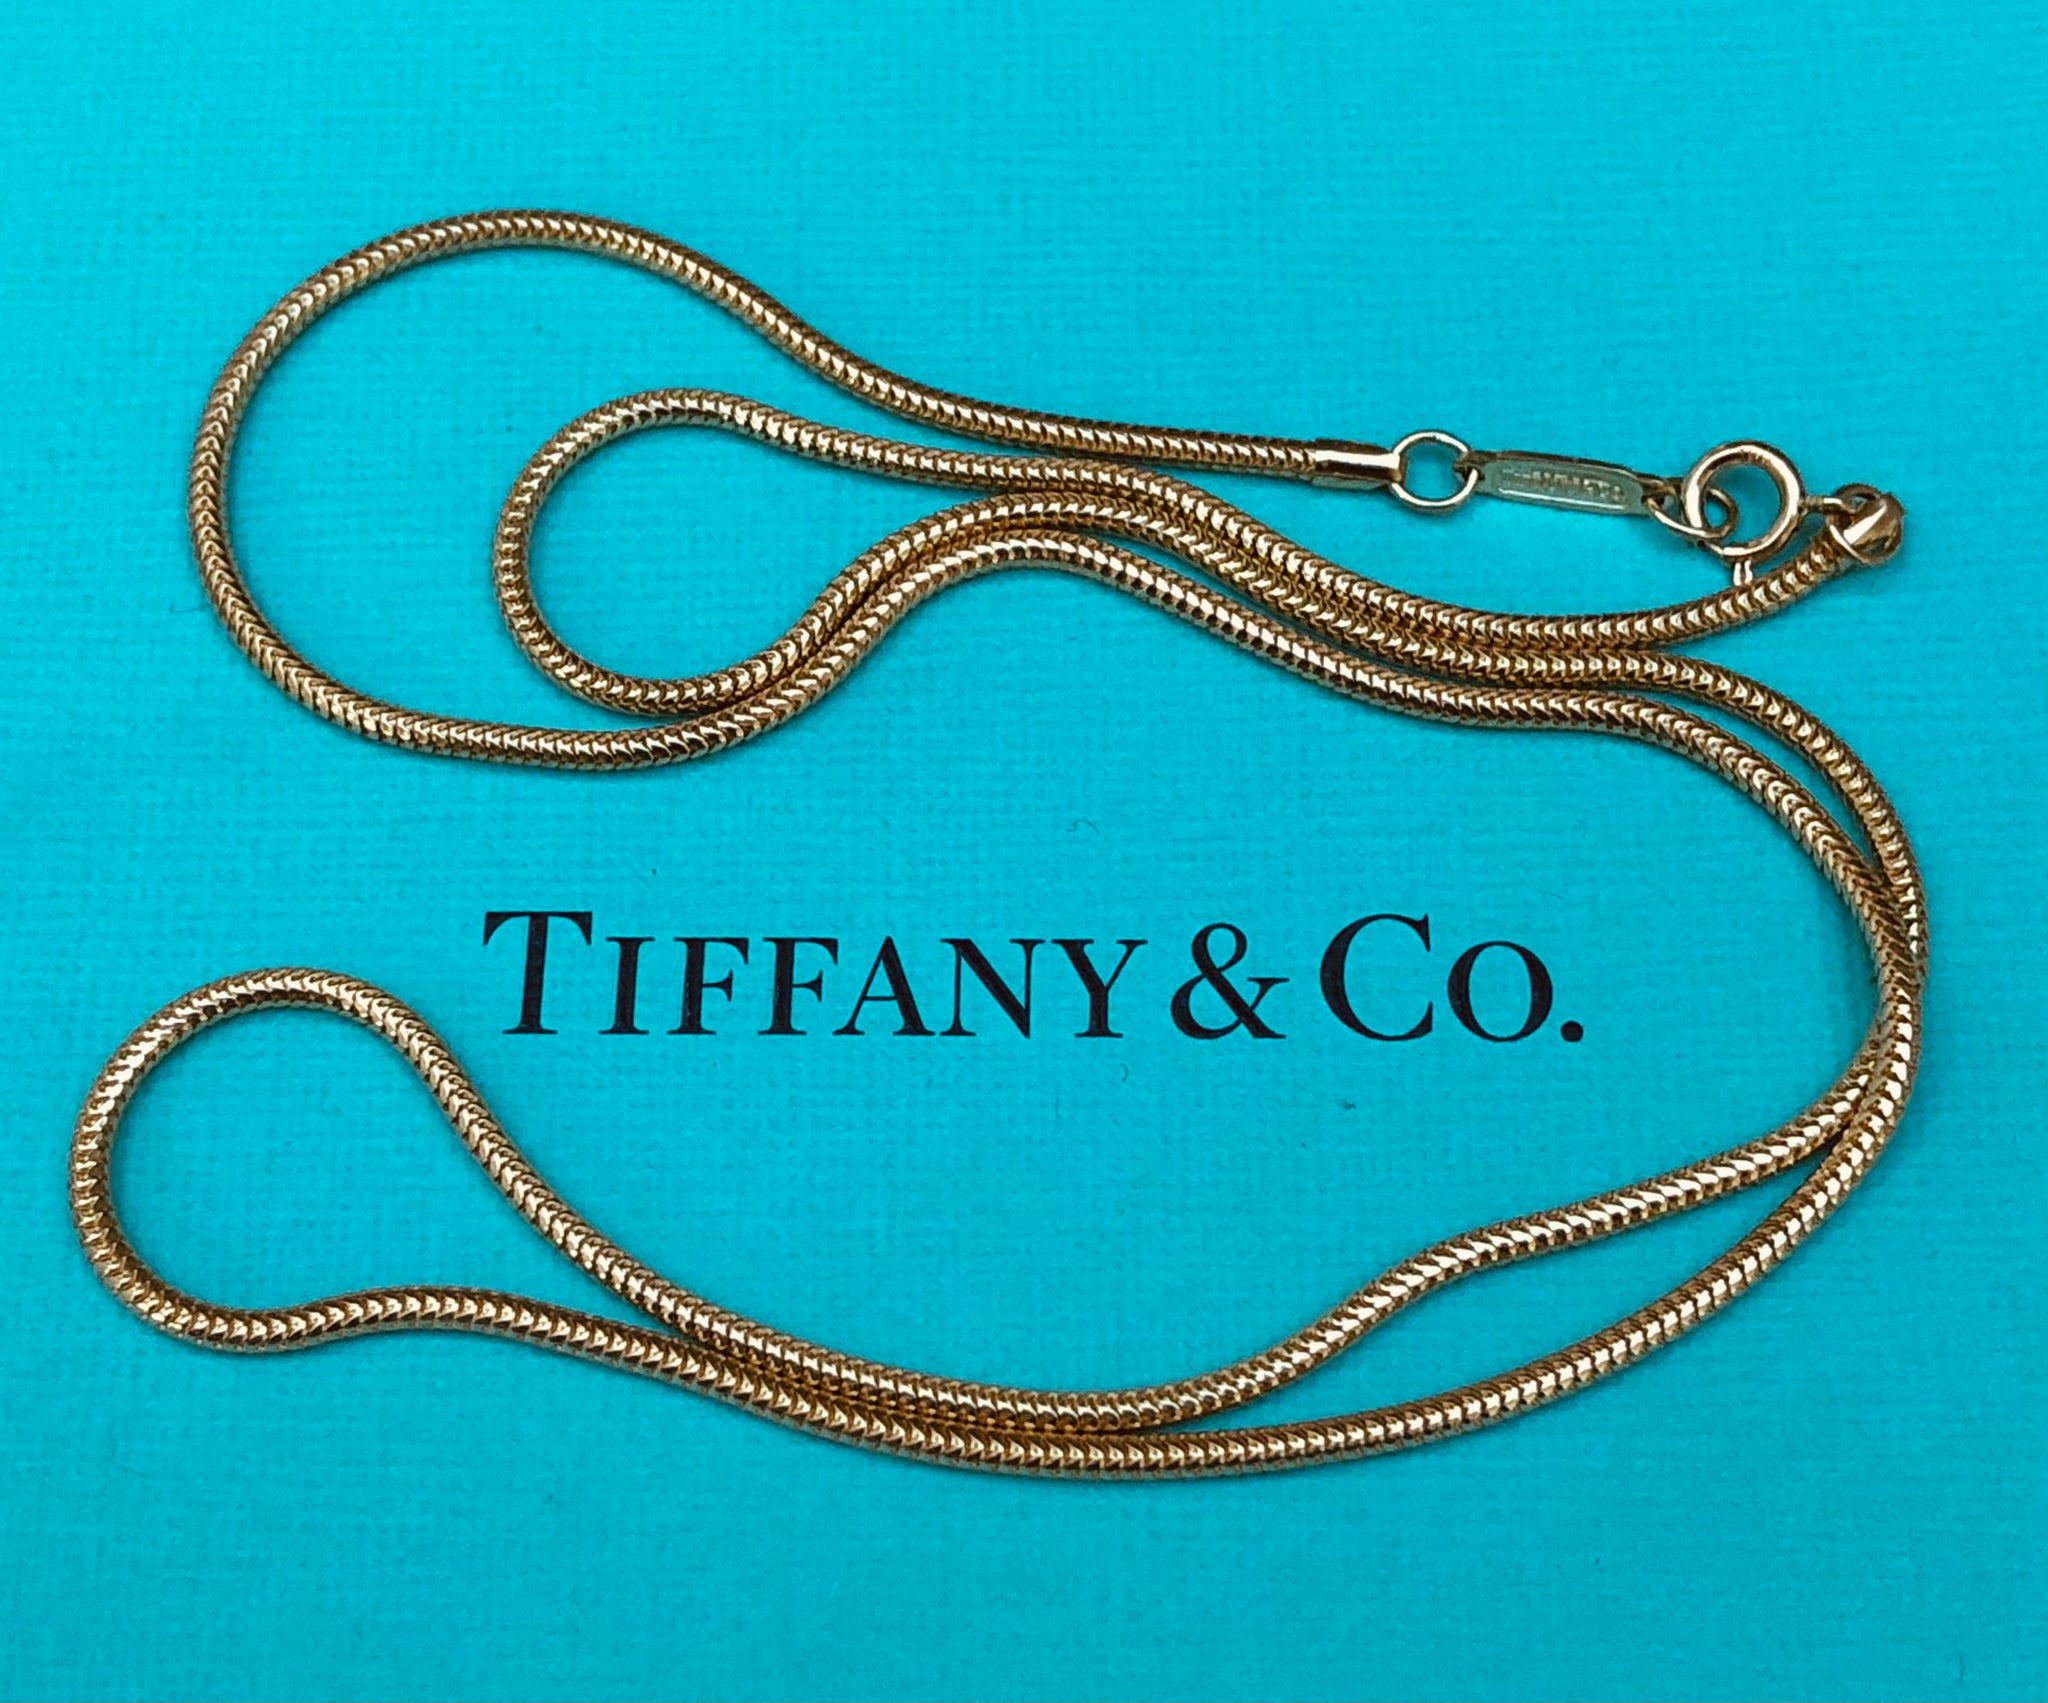 Tiffany & Co. Circa 2000 Vintage Solid 18ct Yellow Gold Snake Chain 18" Long